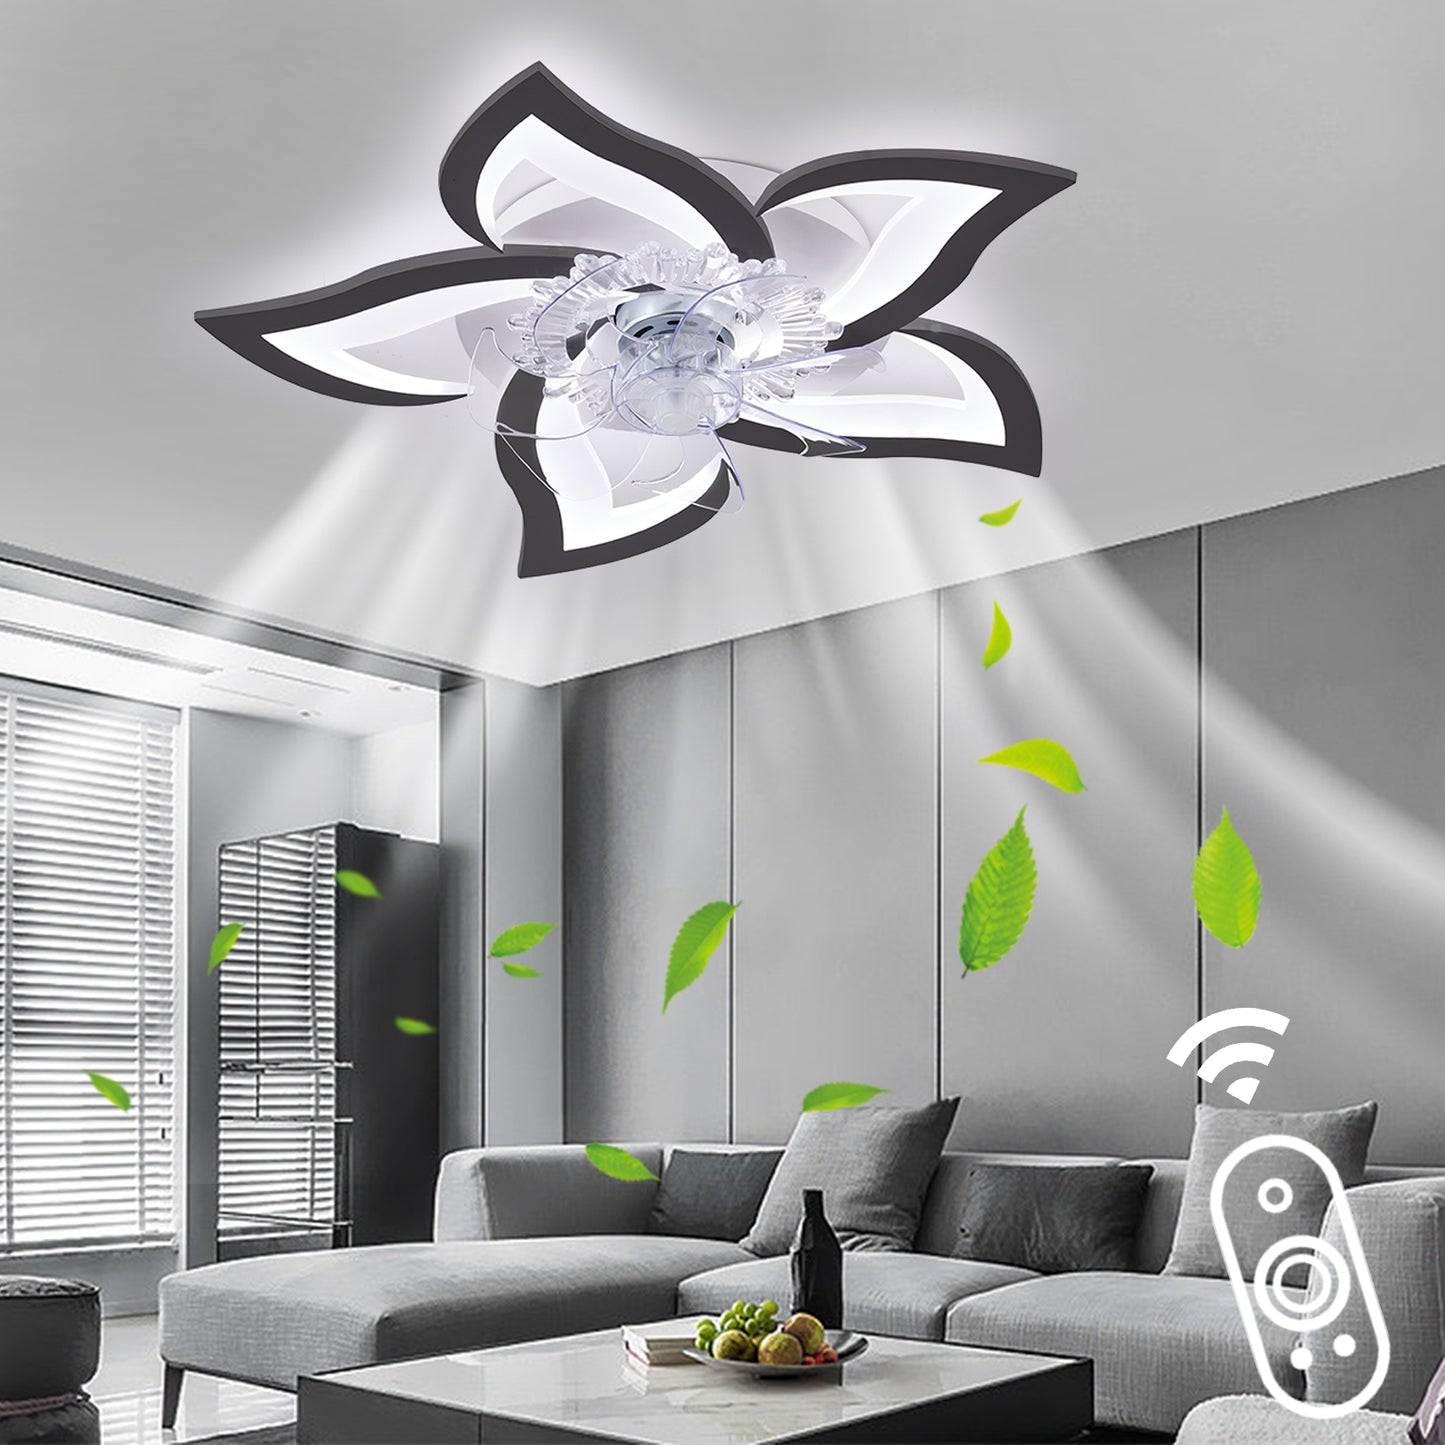 Ceiling Fan with Remote Control, Dimmable LED Lights, and 6 Wind Speeds